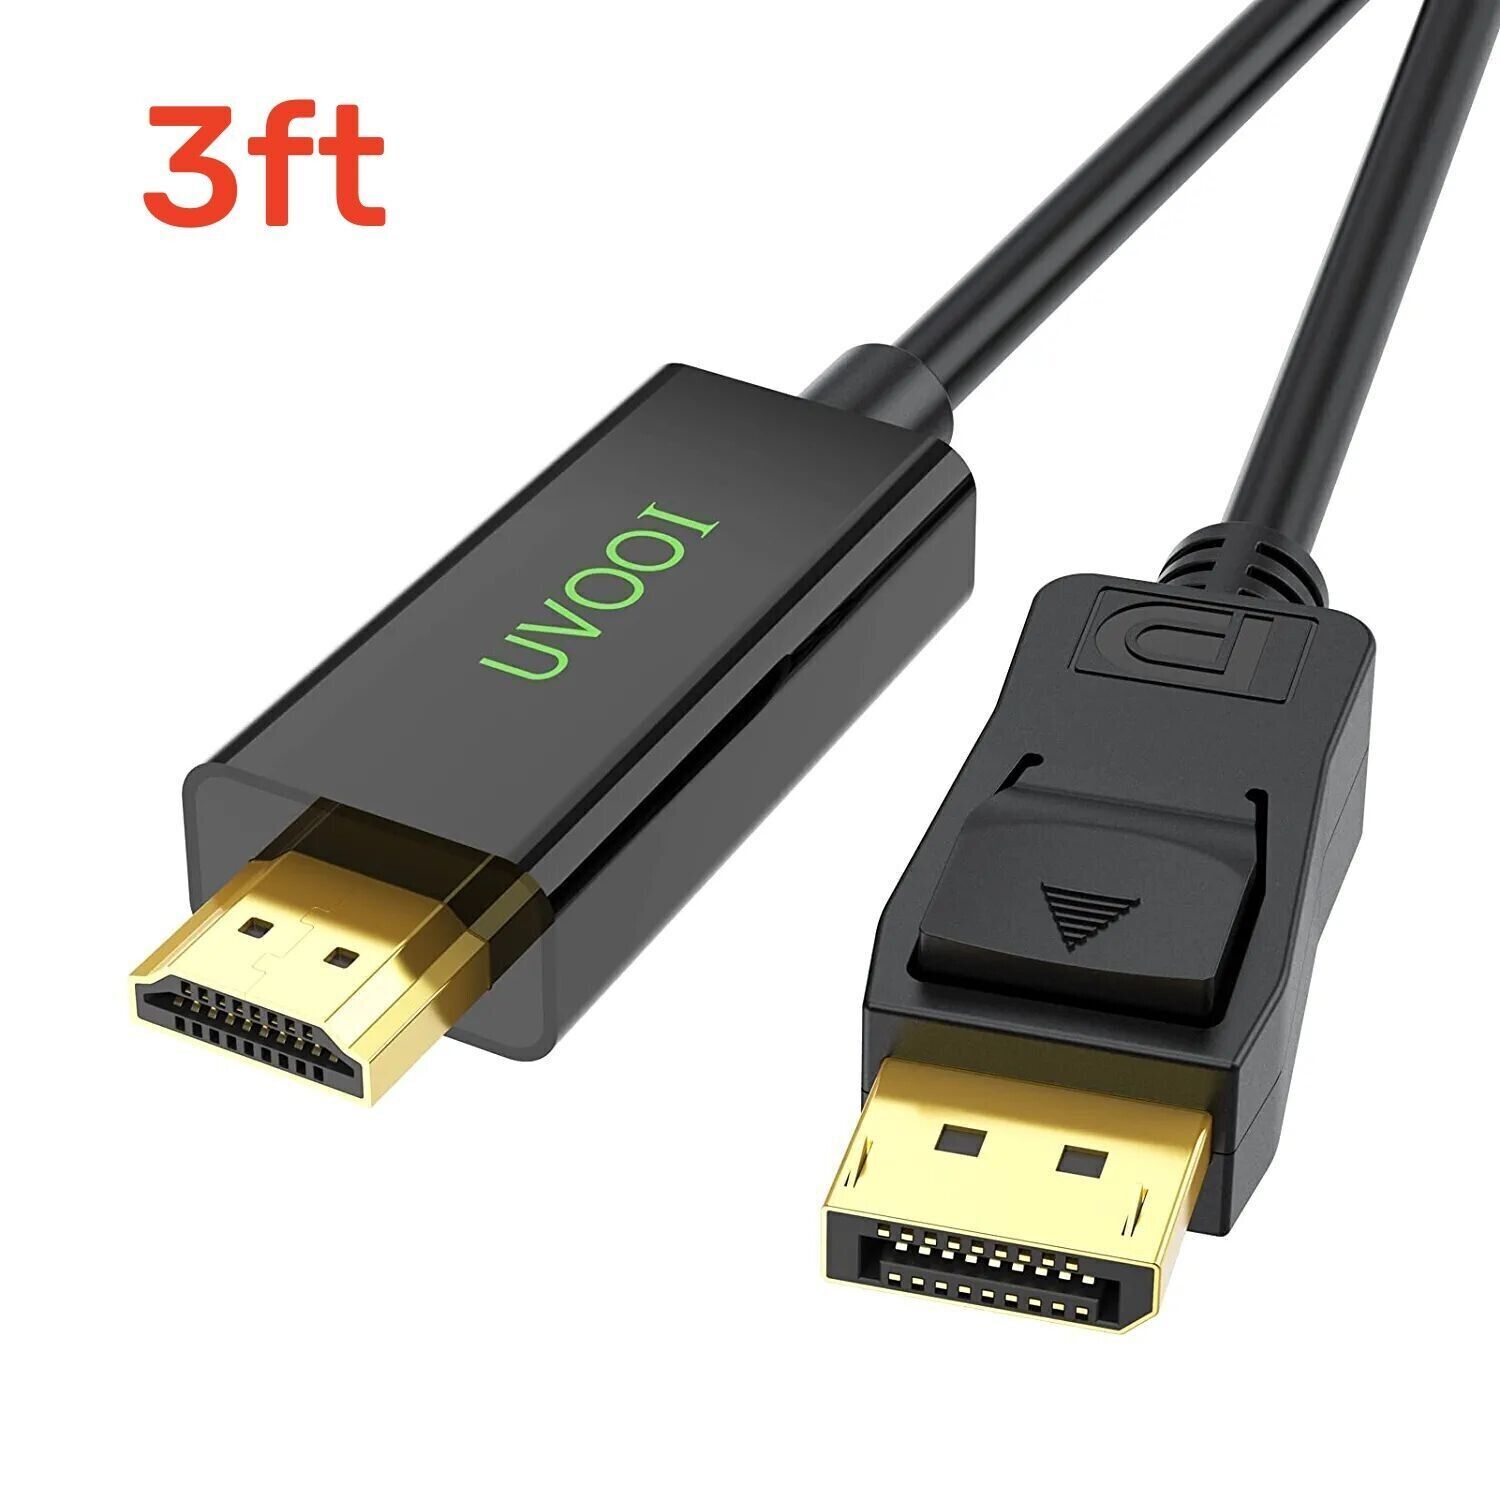 3FT Display Port DP to HDMI Cable 1080P 60Hz for PCs to HDTV Monitor Projector